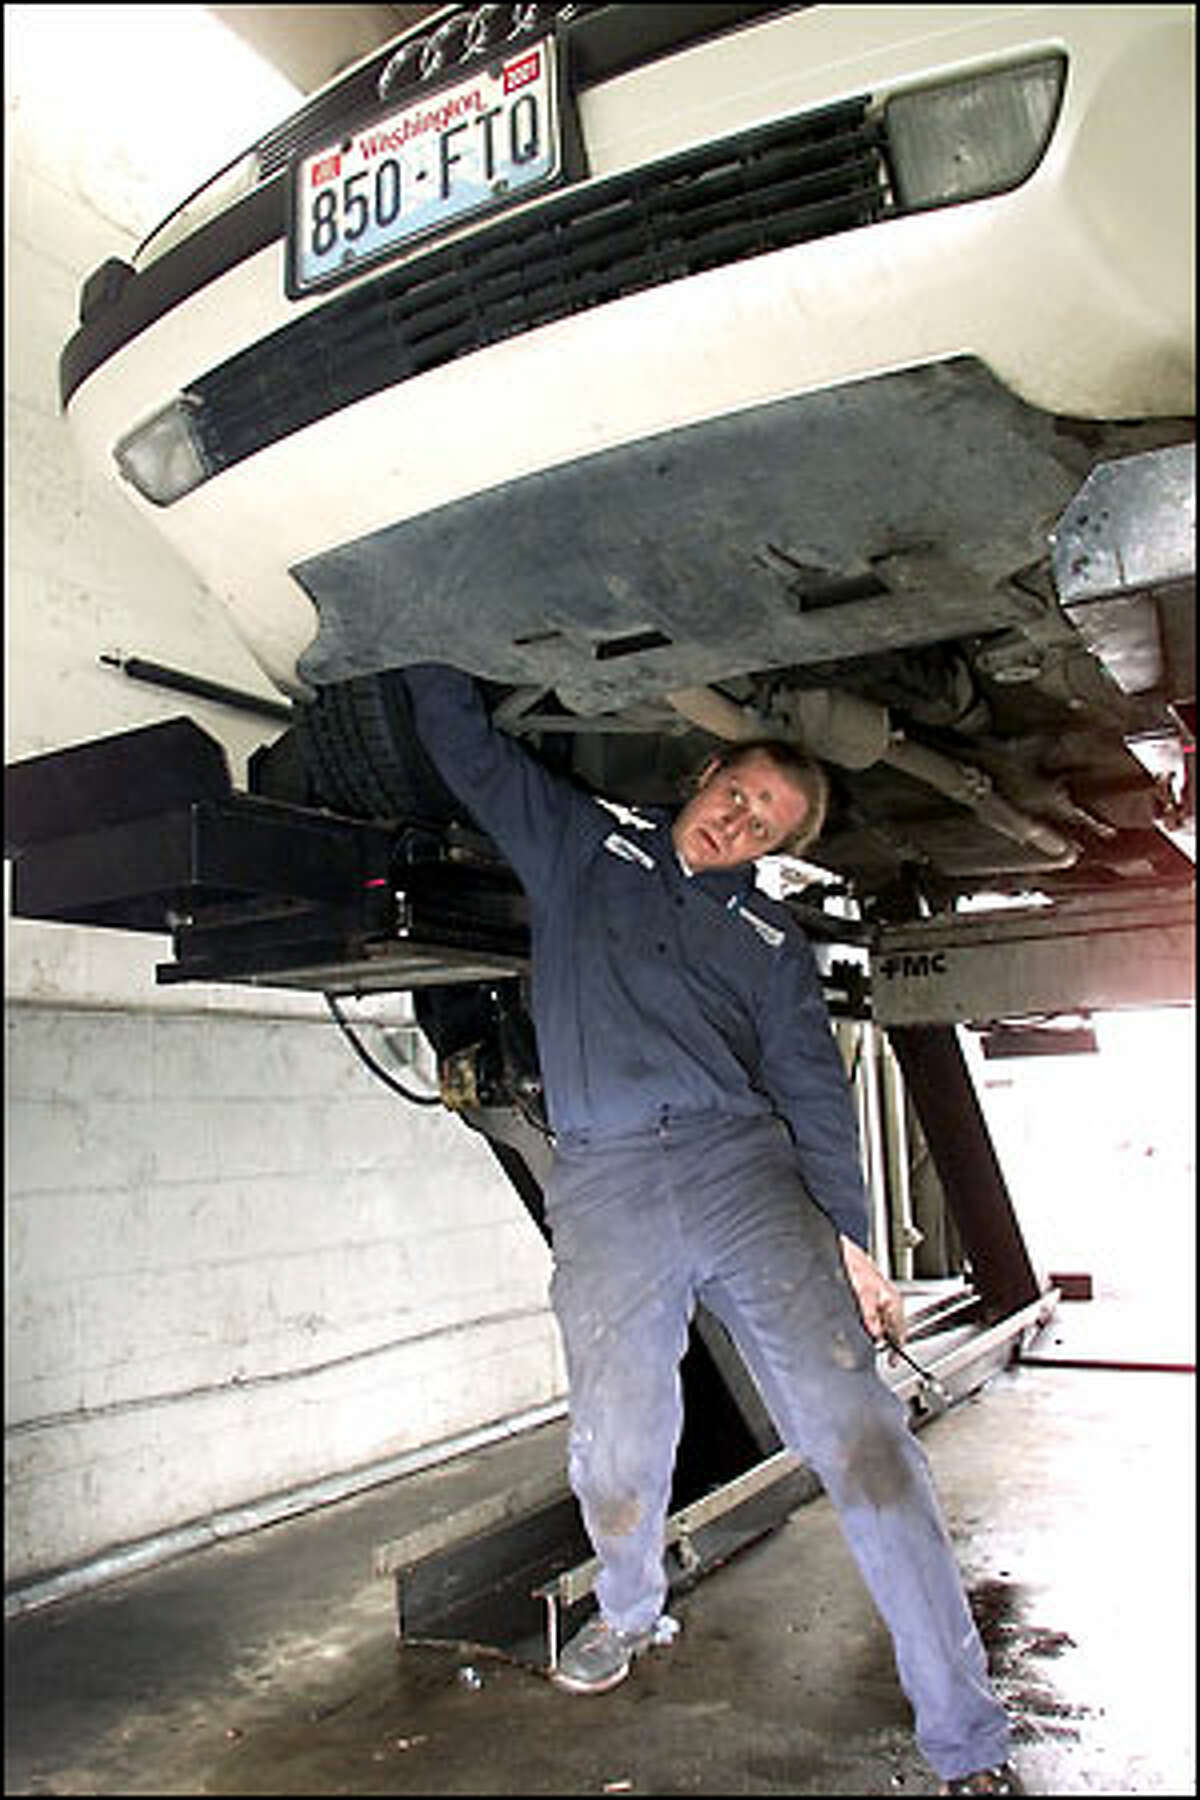 Auto mechanic David Hanson keeps his eyes on a computer monitor while adjusting the alignment on a customer's car. Hanson graduated from King County's drug court in May 2000.